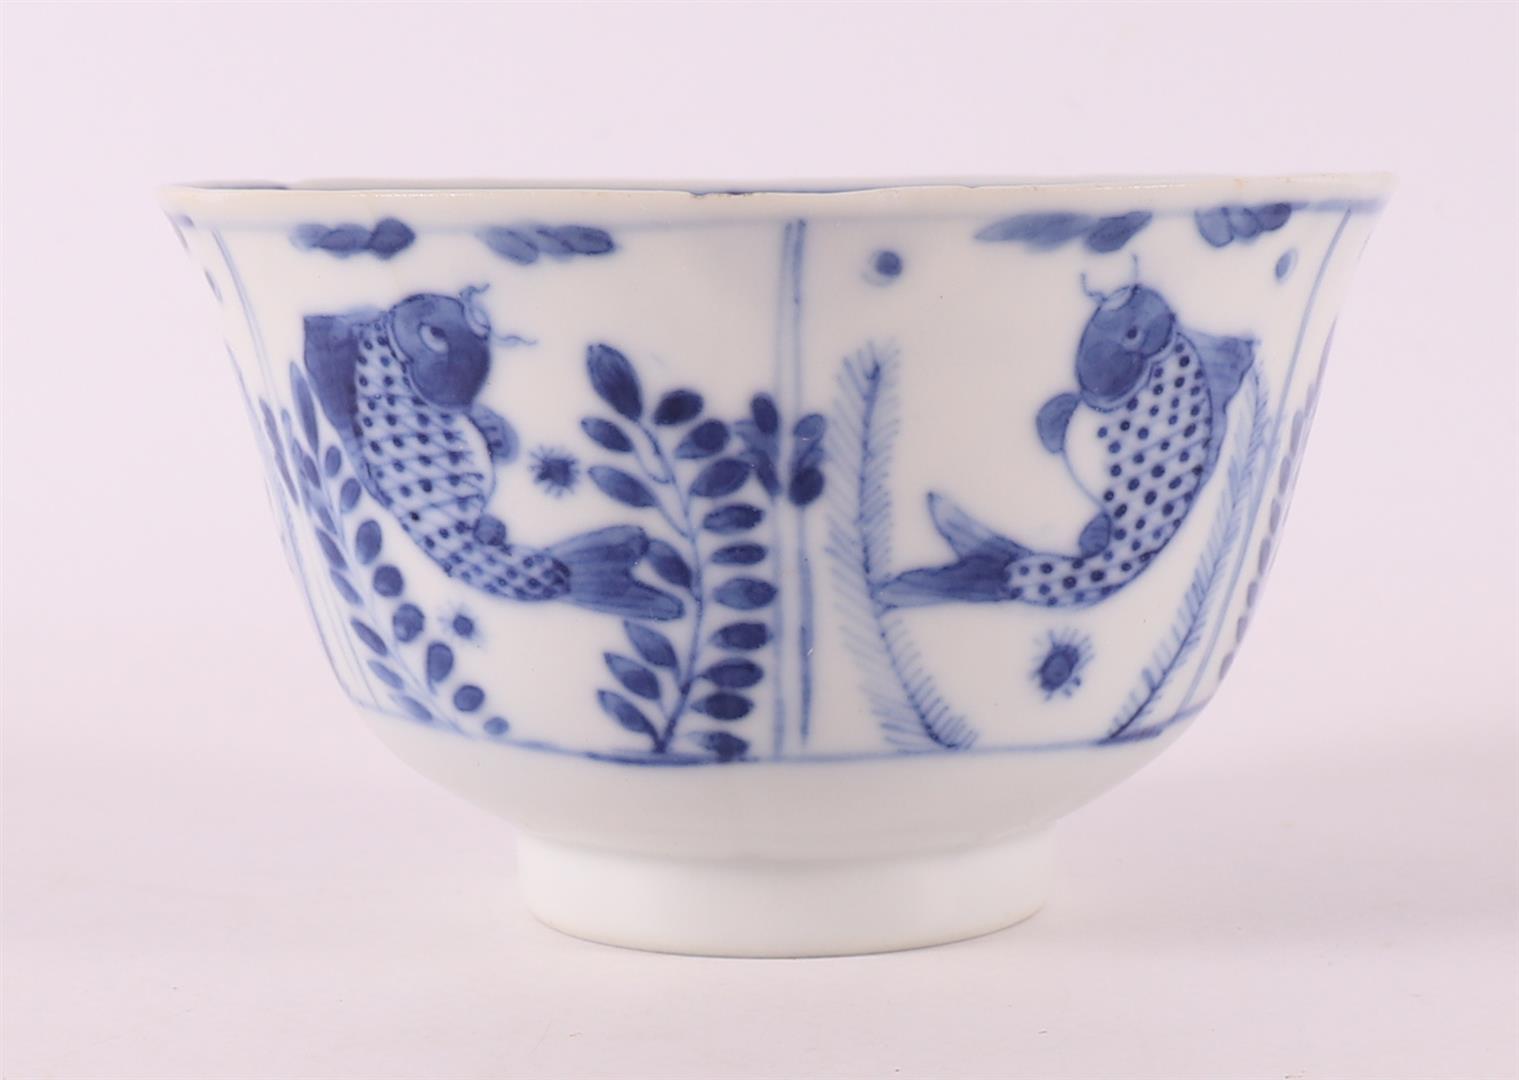 A blue and white porcelain bowl, China, 19th century. - Image 4 of 8